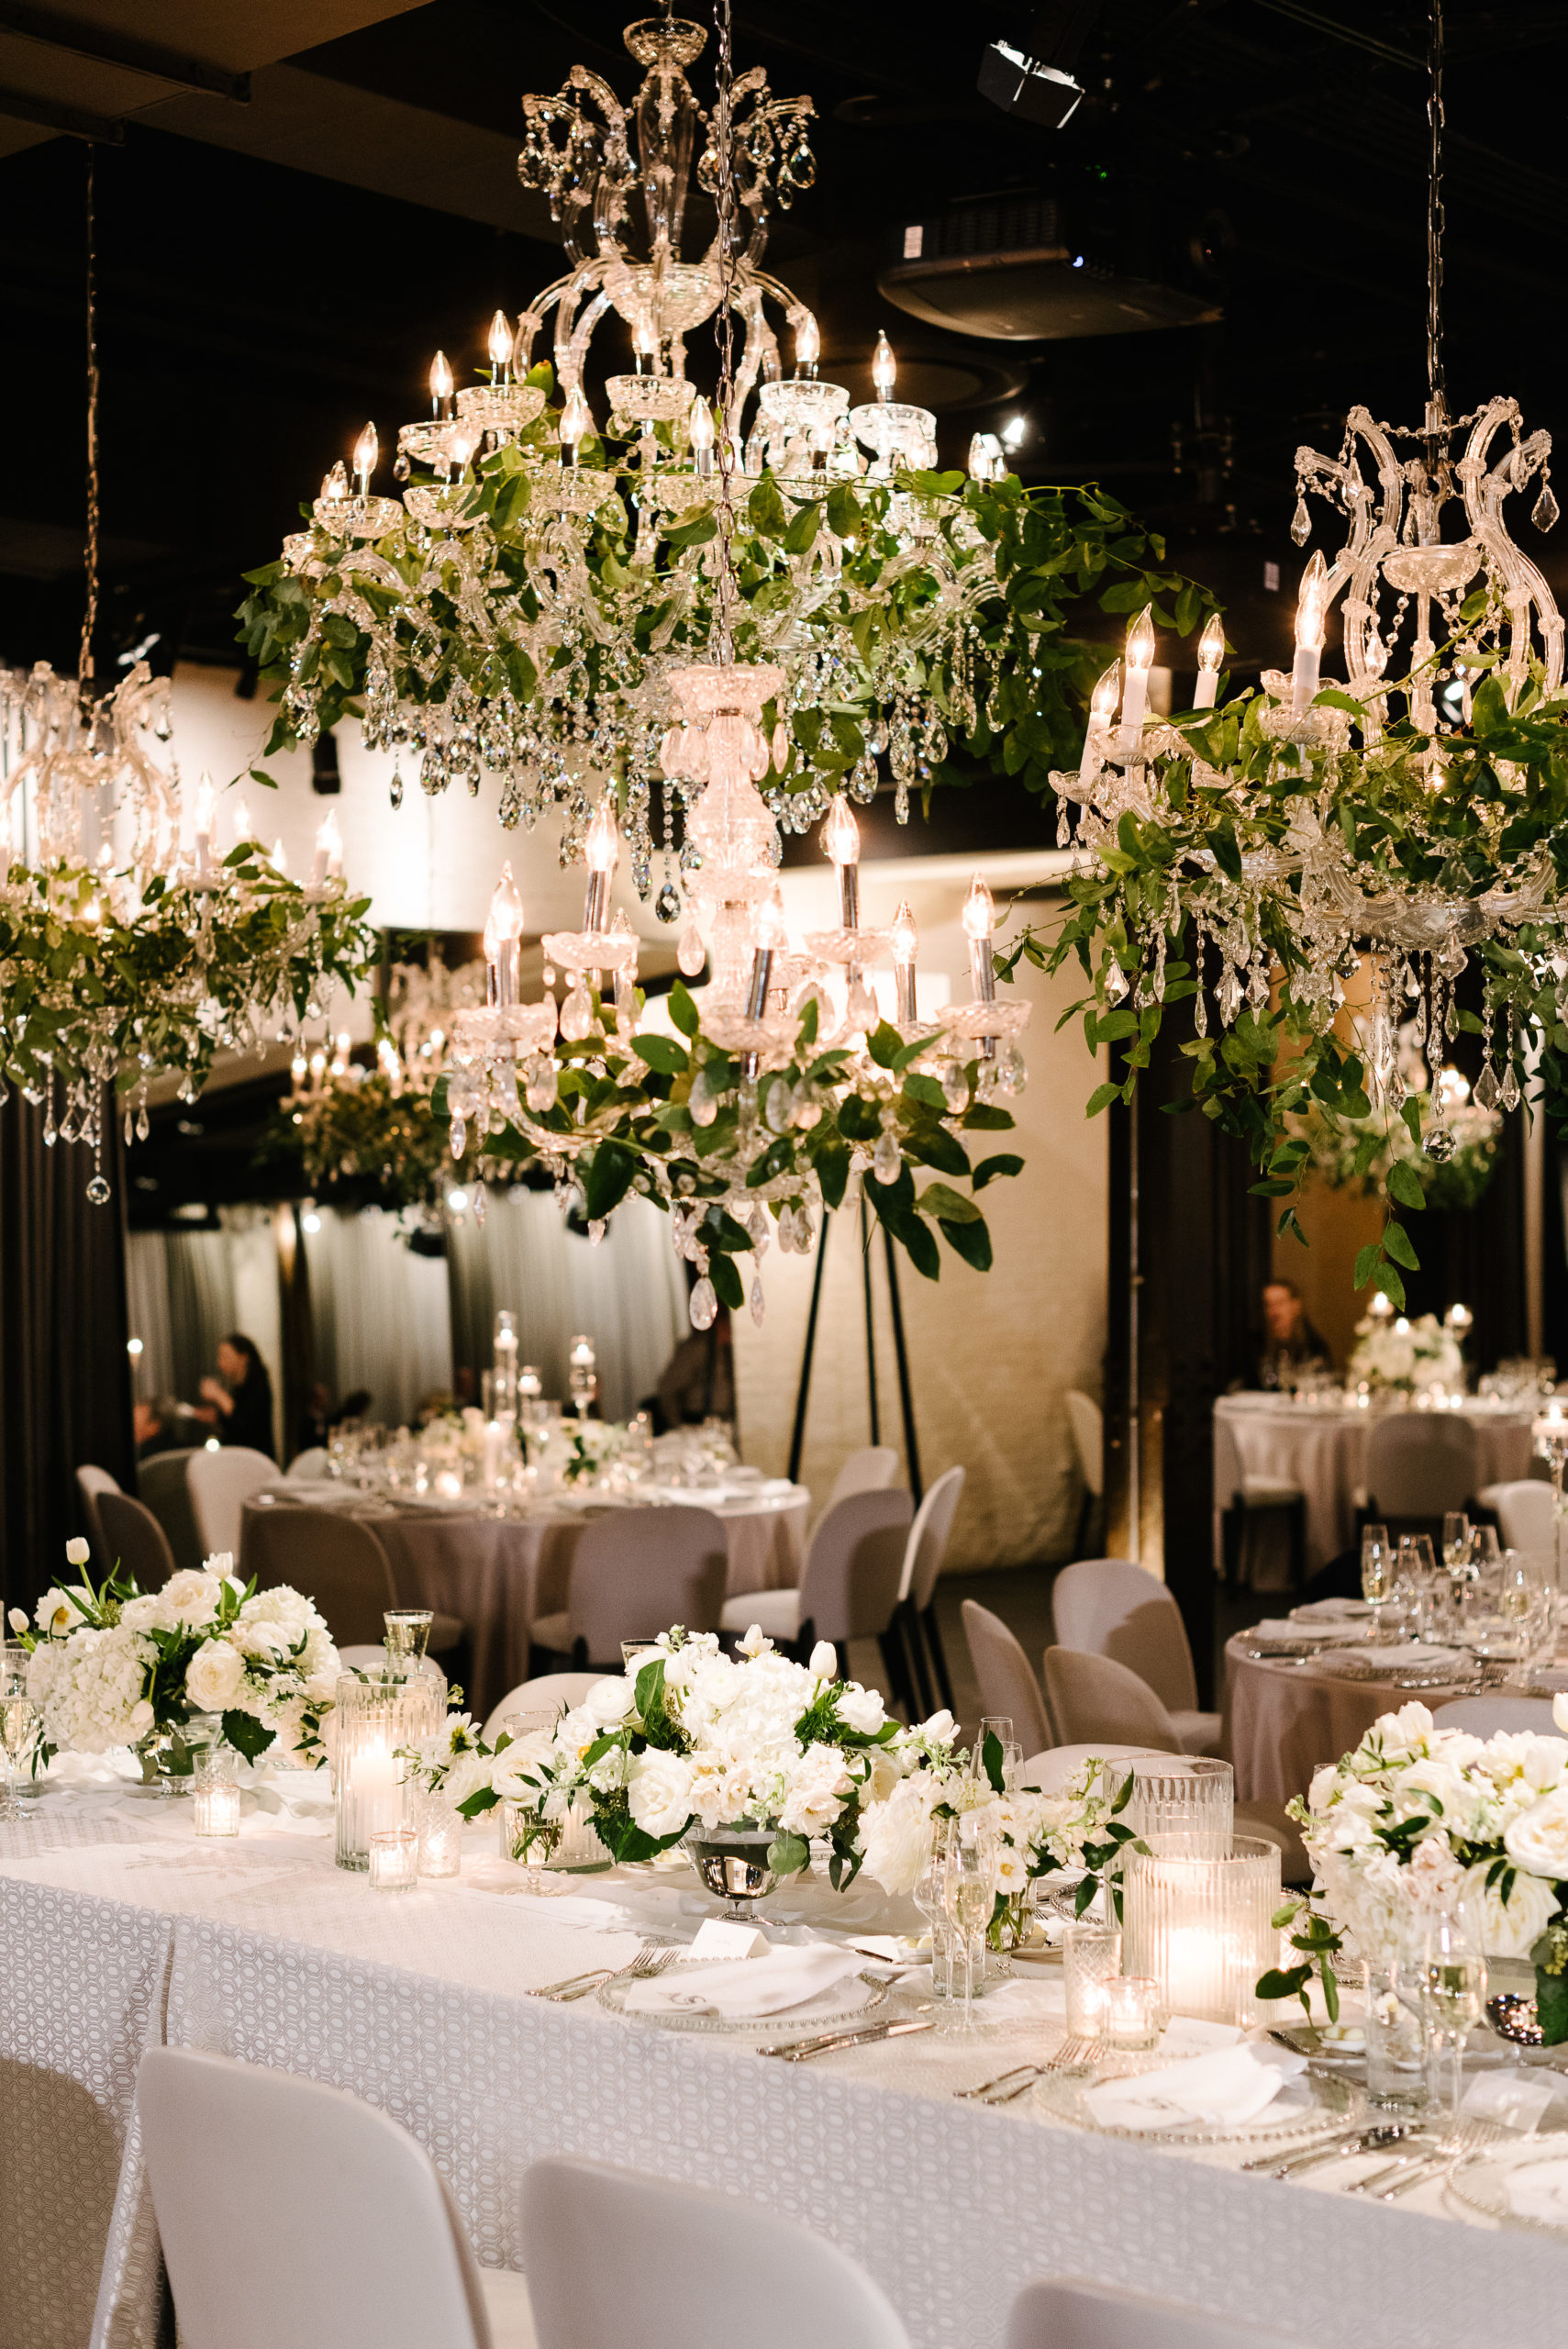 Wedding at The Dalcy with Crystal Chandeliers